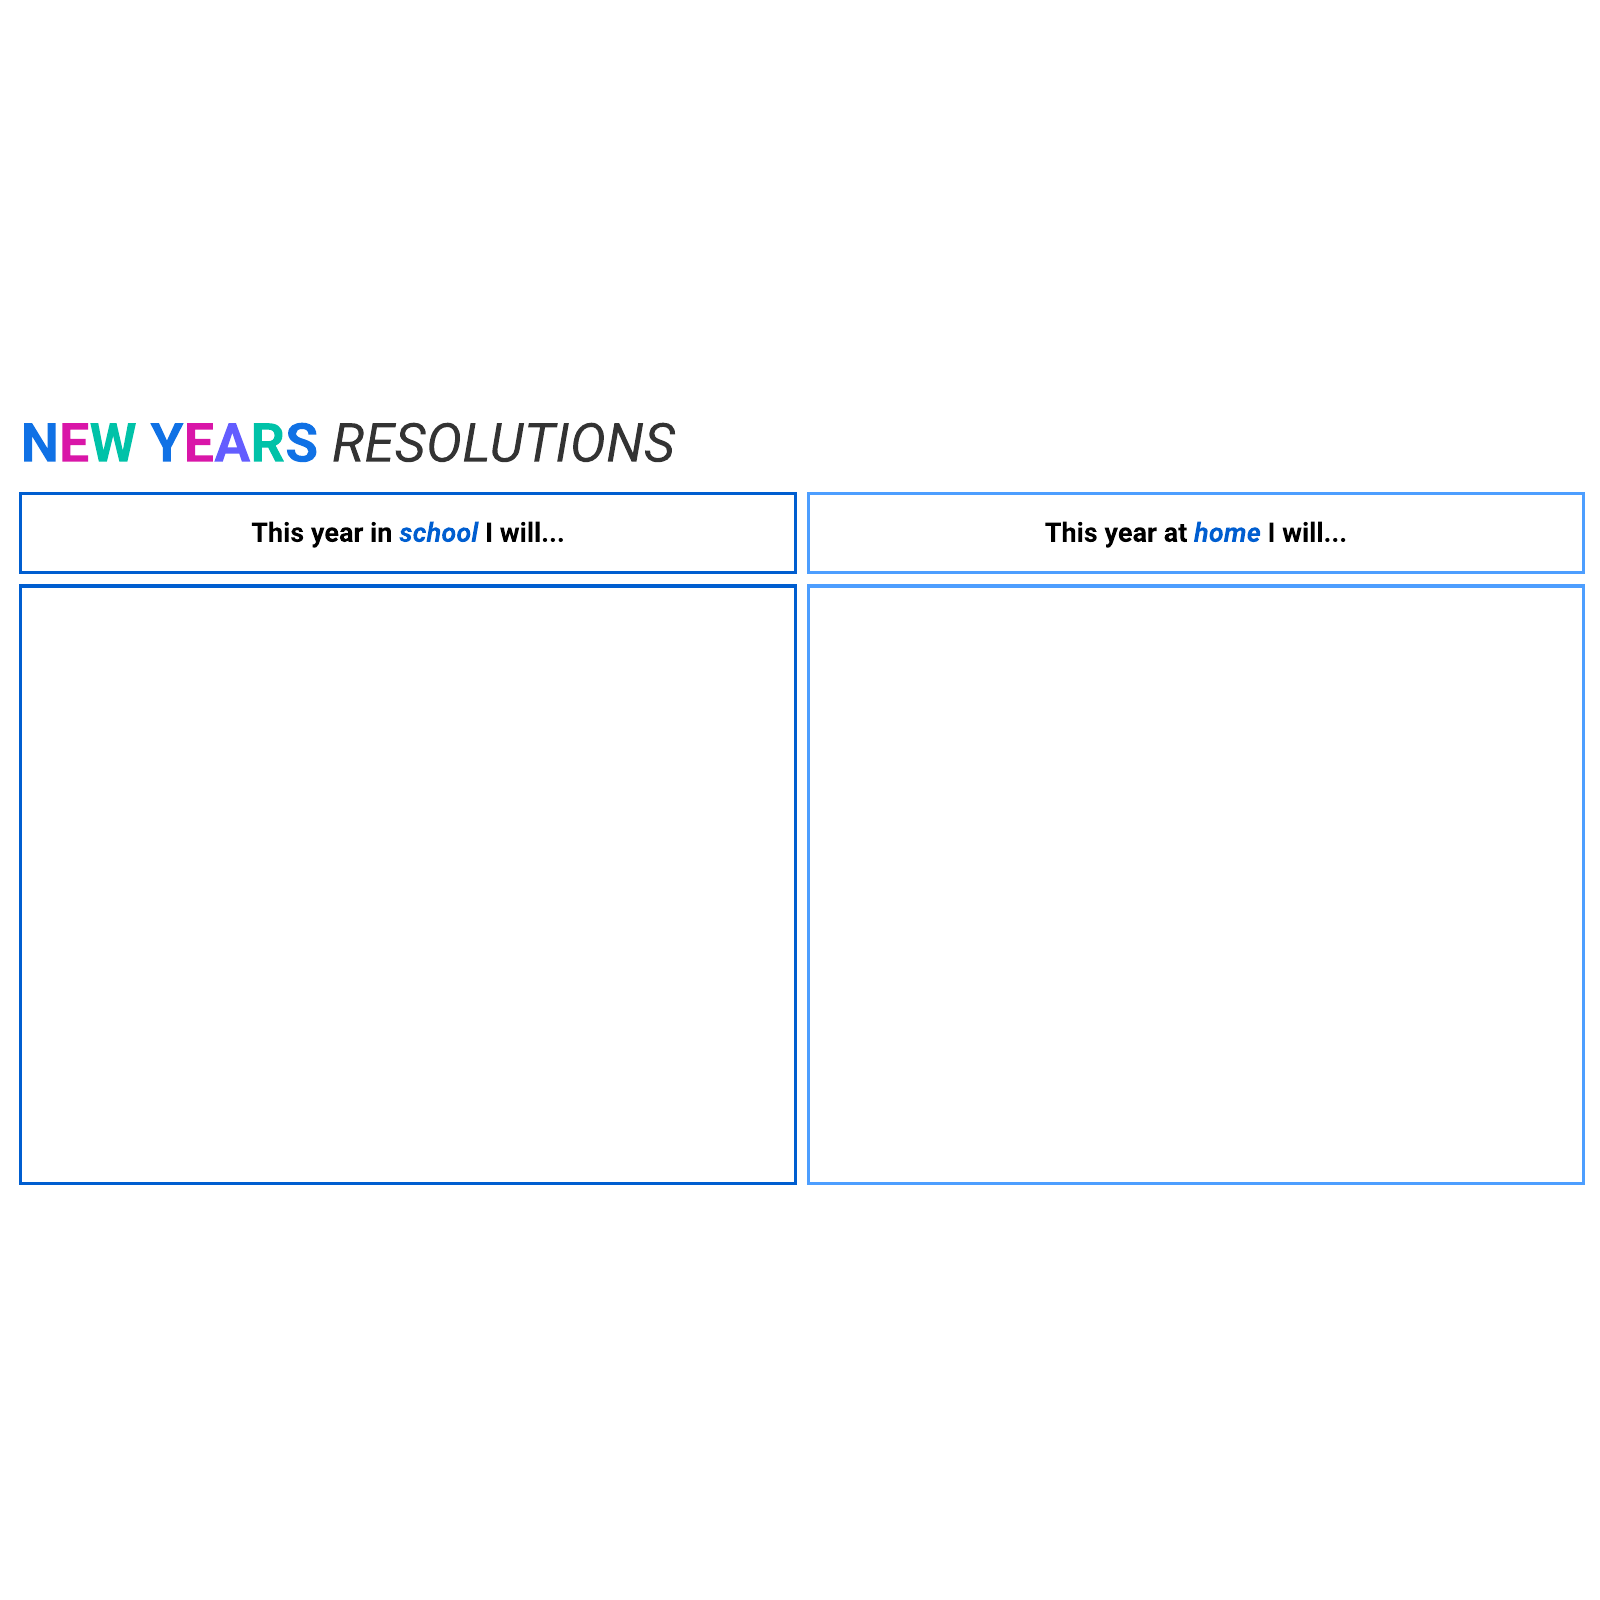 Discussion prompt: New Year's resolutions example